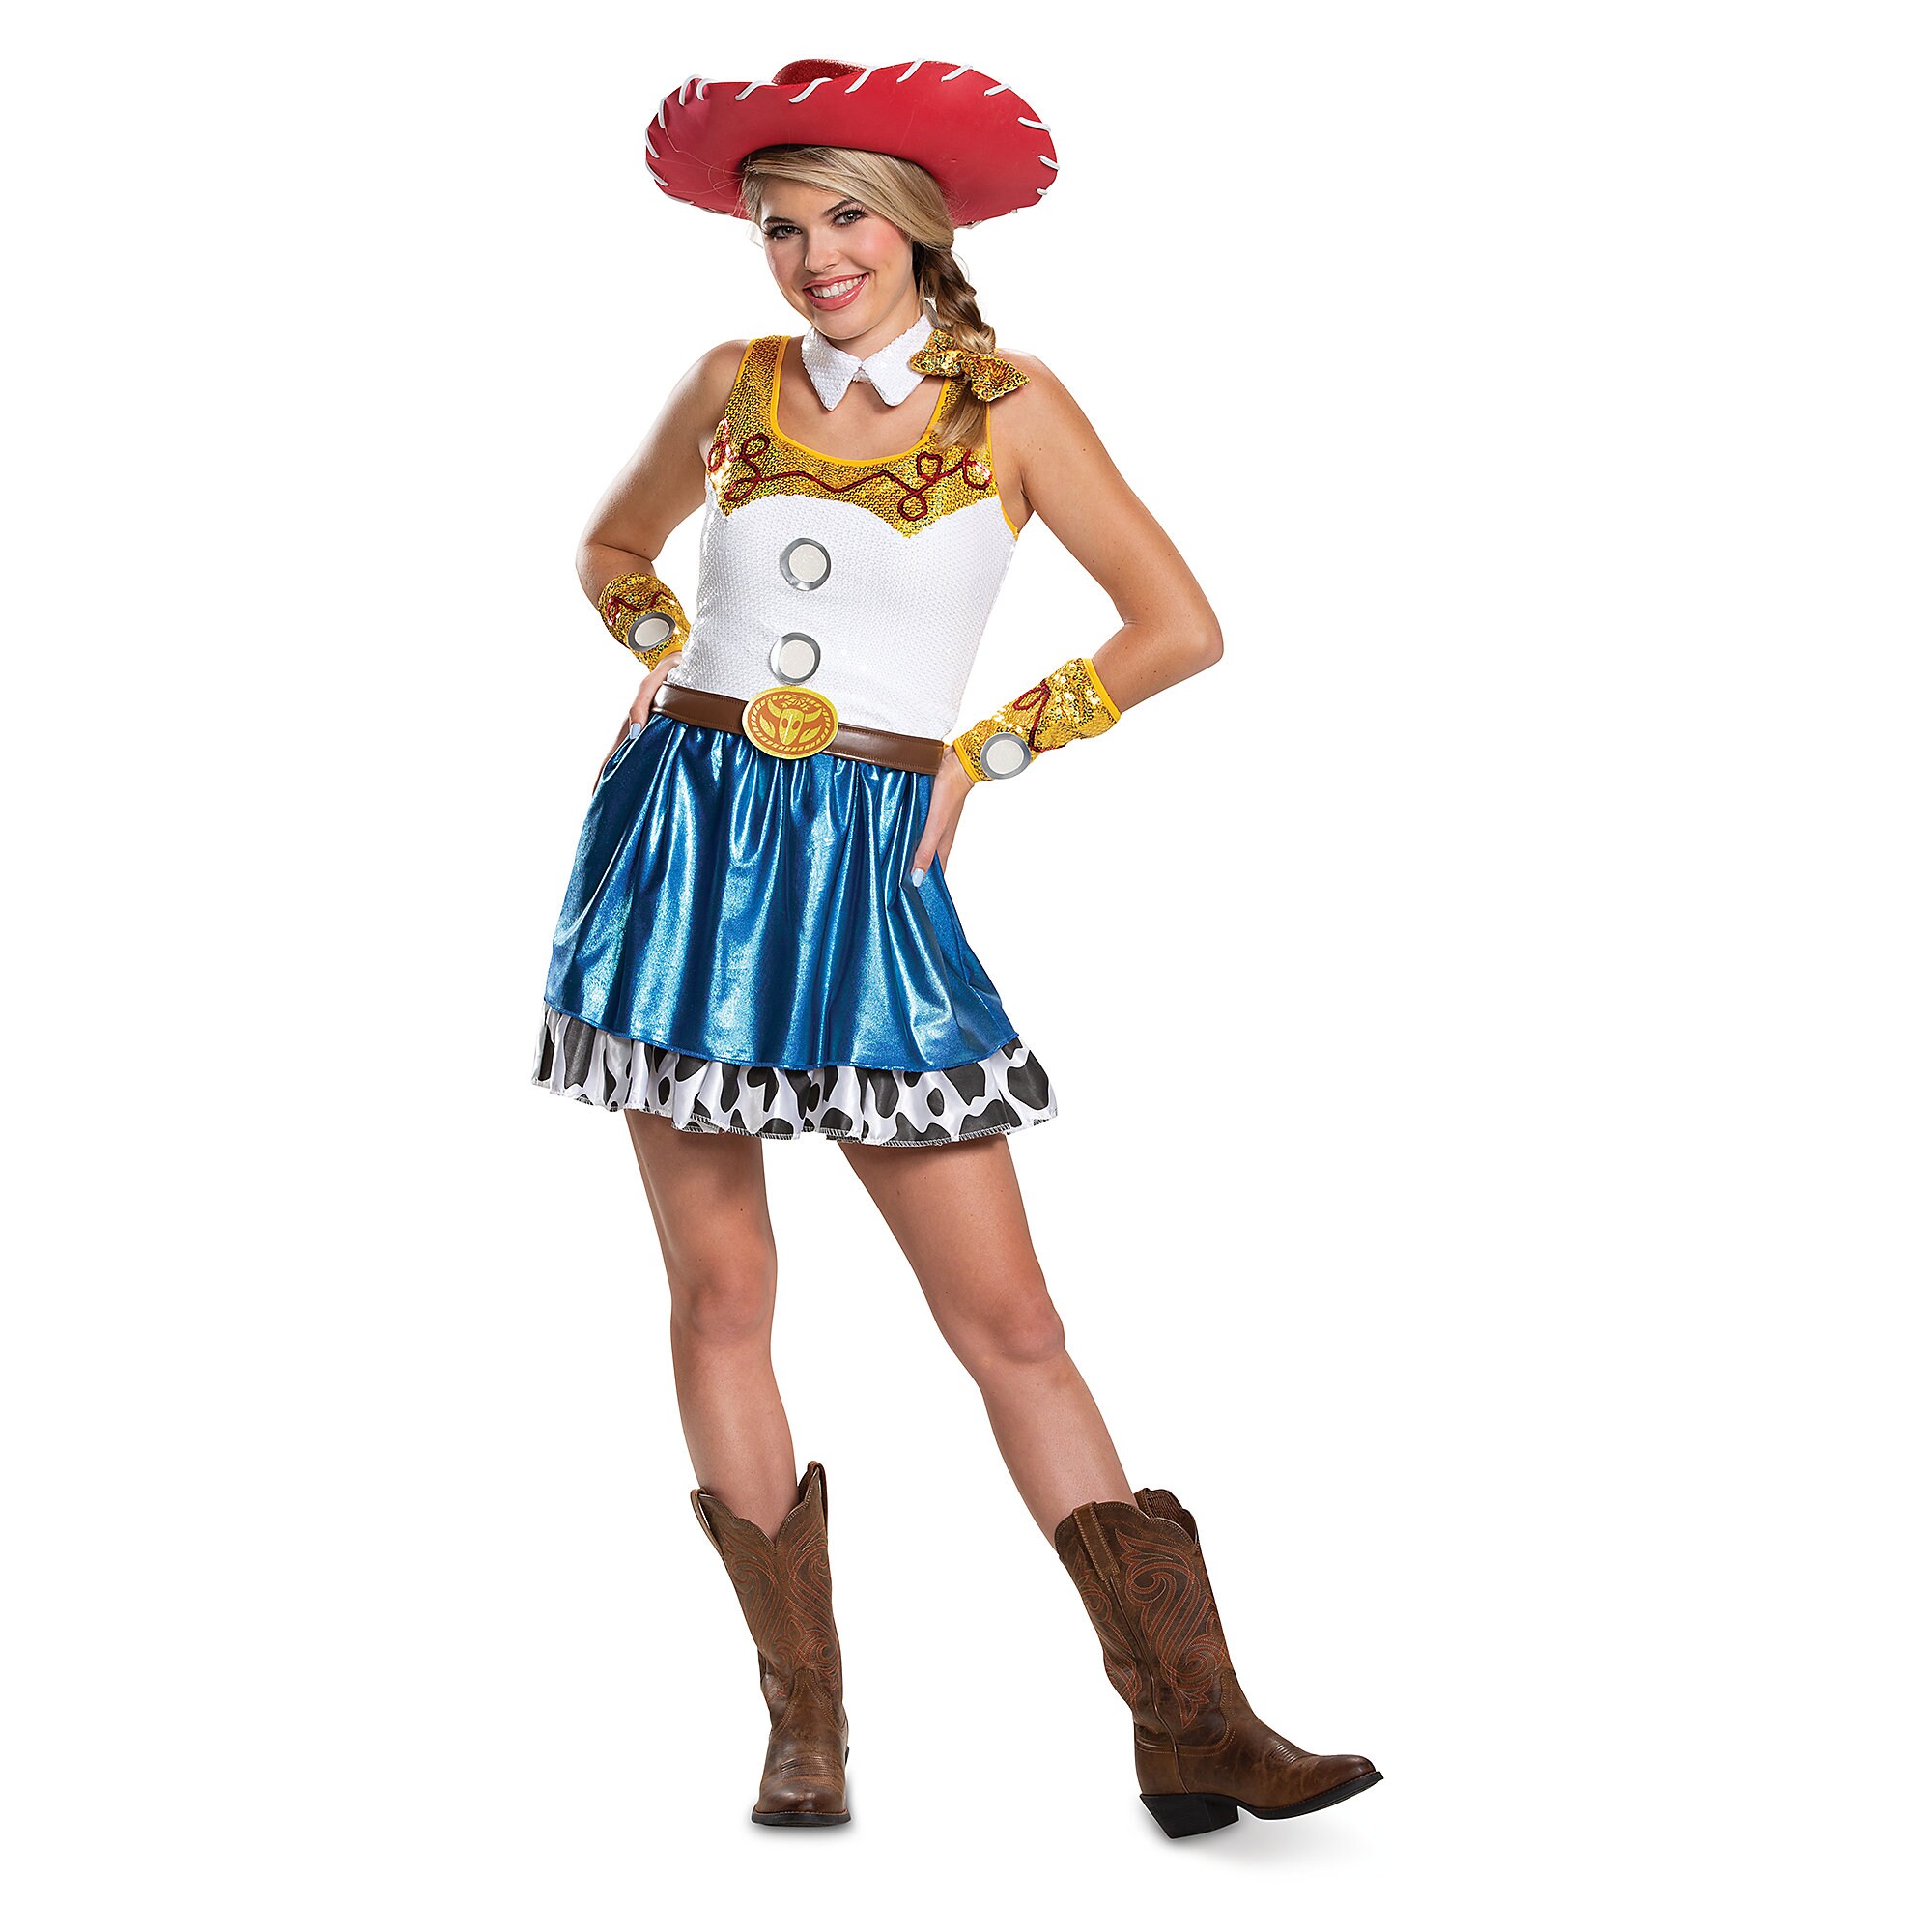 Jessie Dress Costume for Adults by Disguise - Toy Story now out for ...